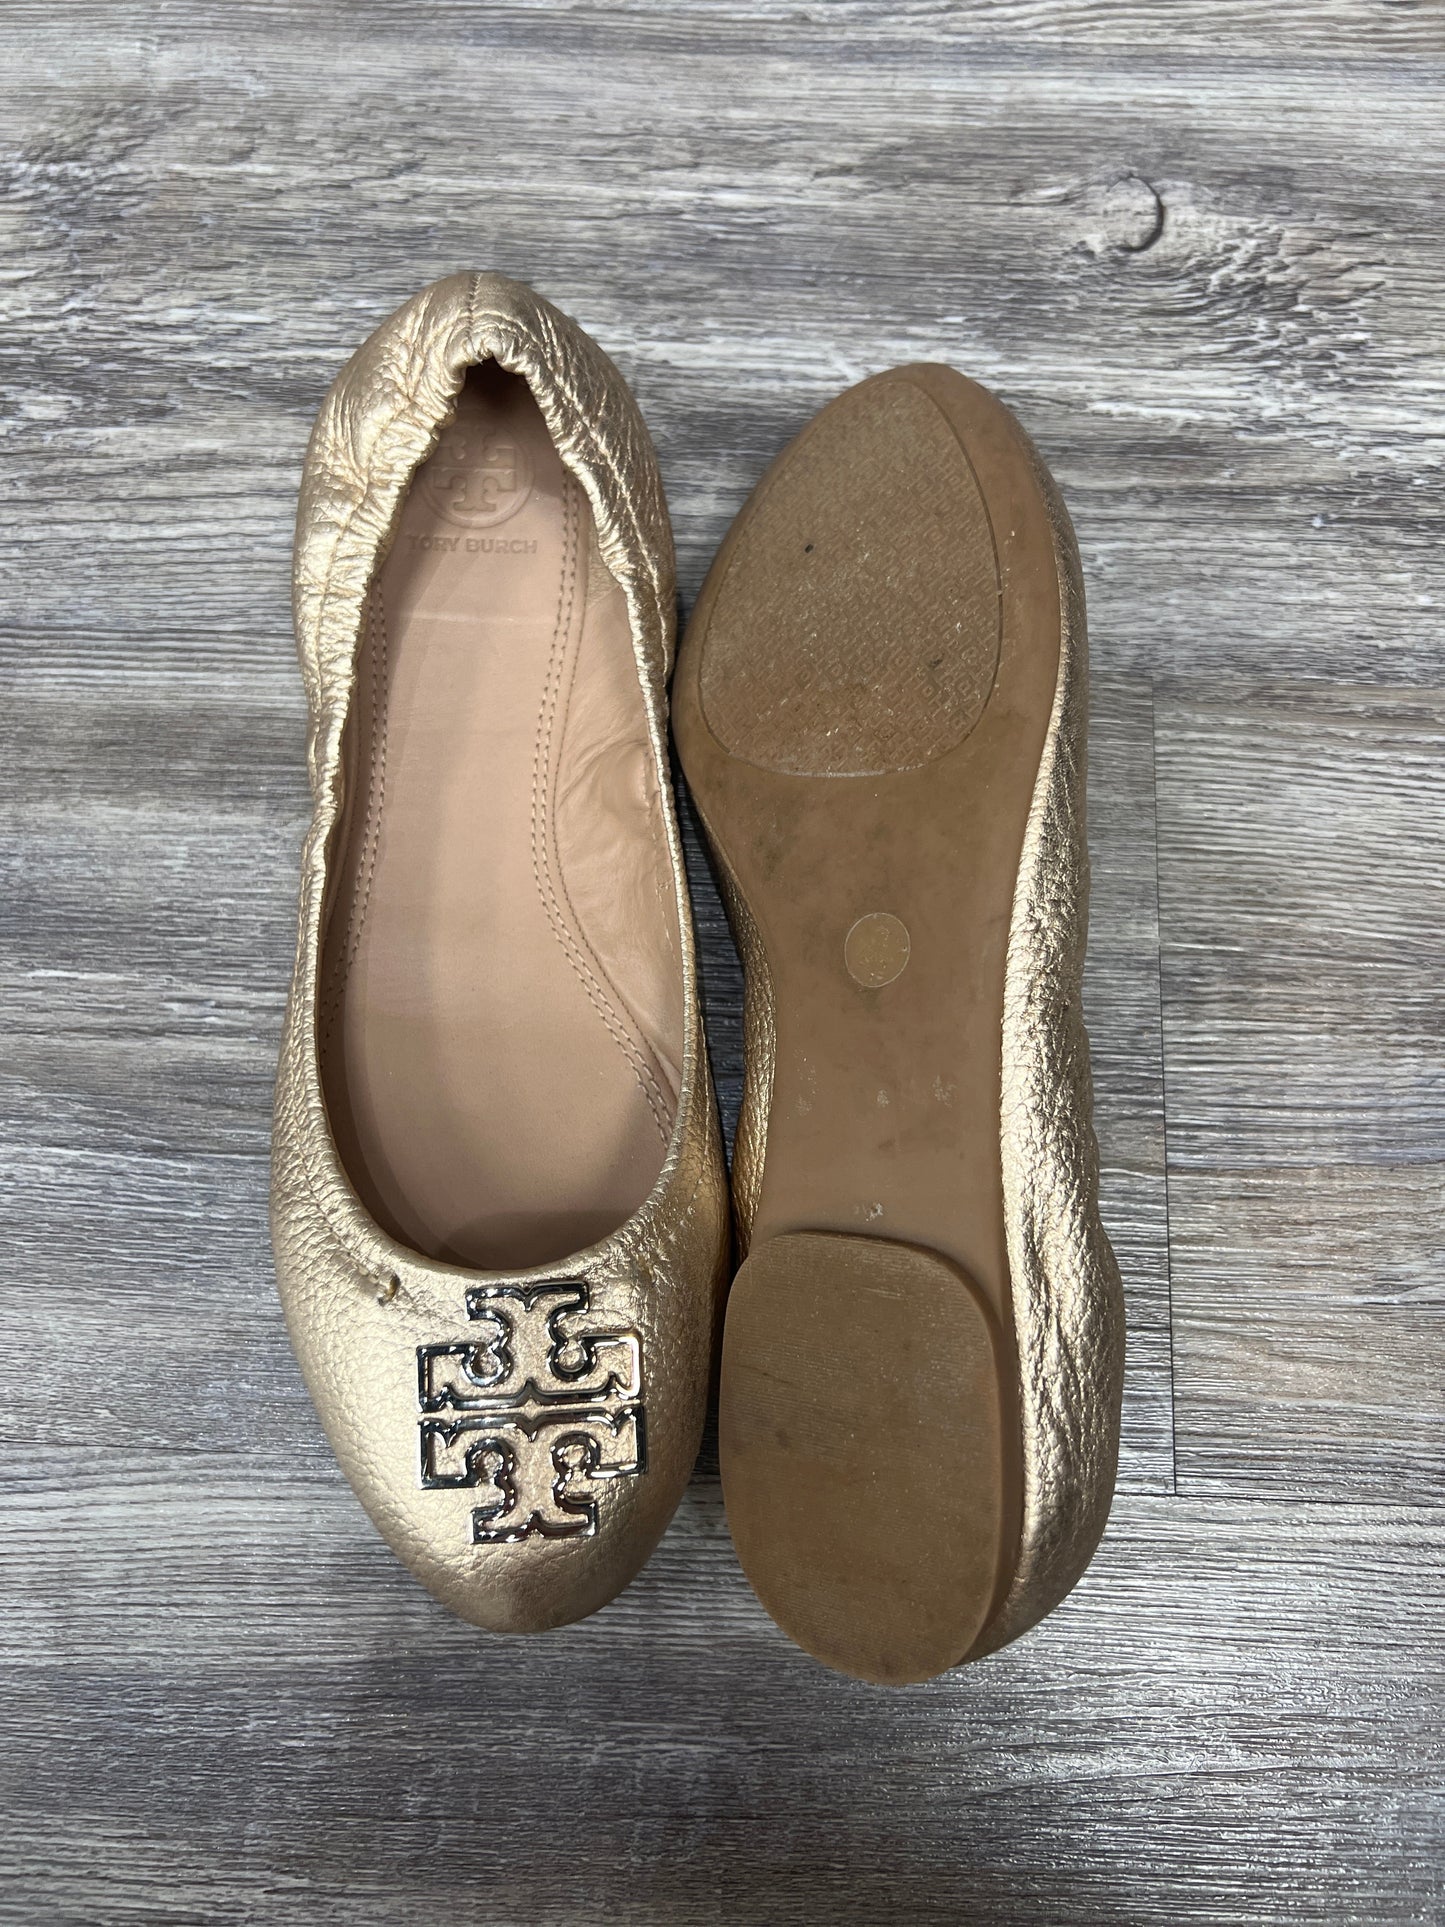 Gold Shoes Flats Tory Burch, Size 9